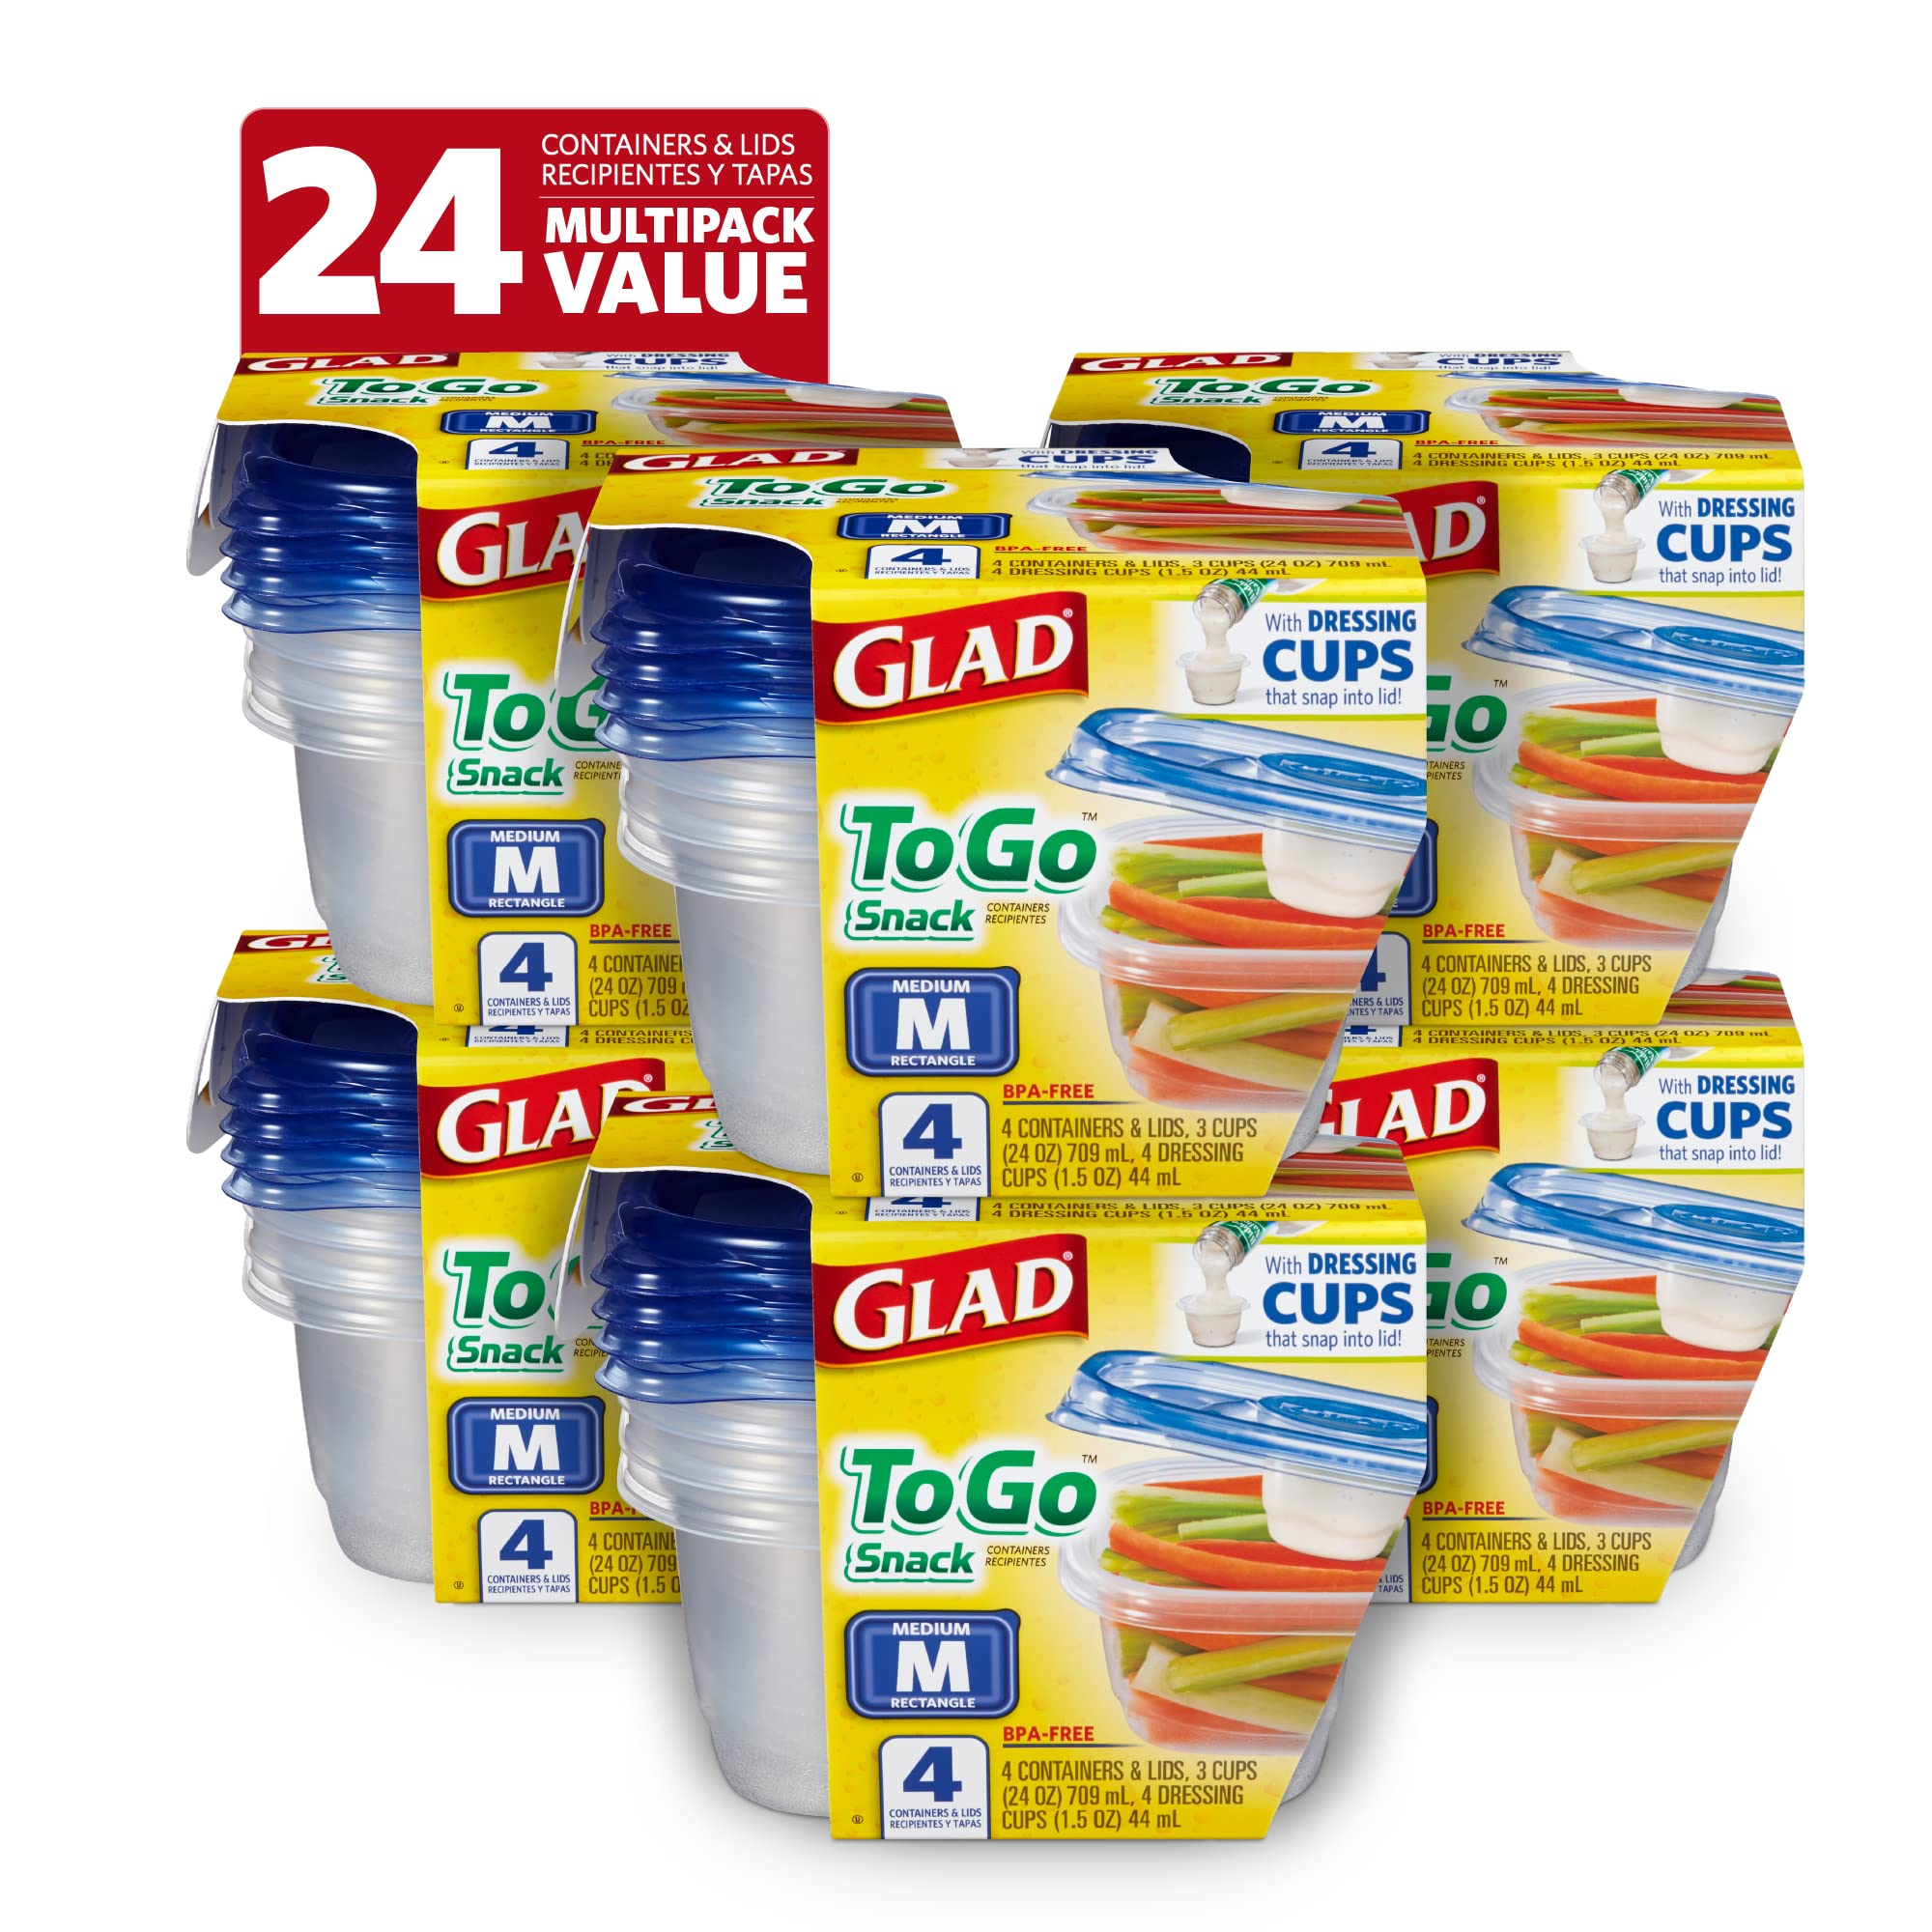 Glad To Go Food Storage Containers | Medium 24 oz Containers for Food Storage from Strong and Sturdy Rectangle Containers in Standard Size, 4 Count - 6 Pack for $11.17